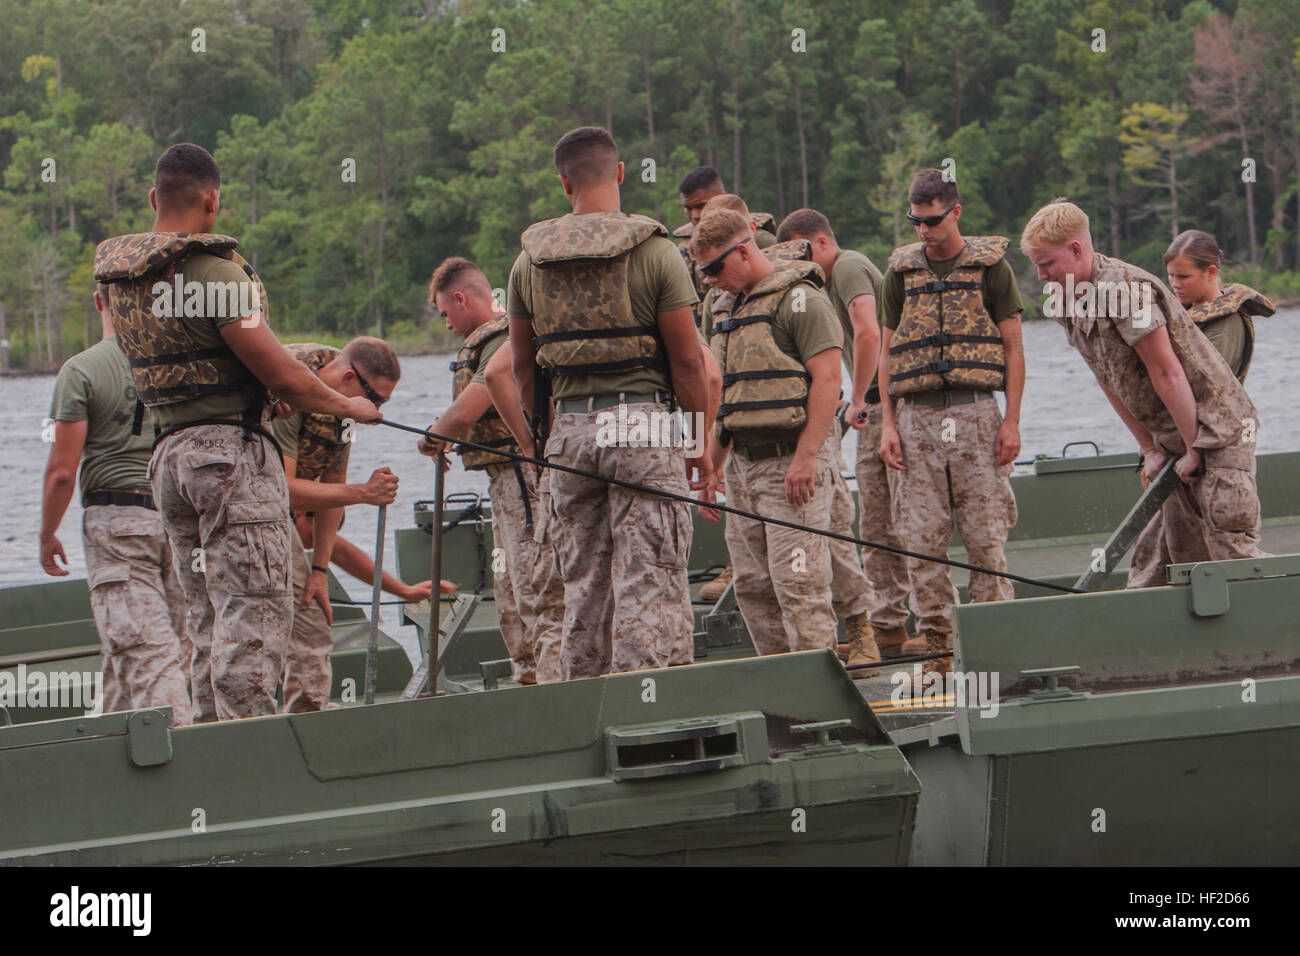 U.S. Marines with Bridge Company (Bridge Co.), 8th Engineer Support Battalion, 2nd Marine Logistics Group, connect interior bays in the water during improved ribbon bridging training on Camp Lejeune, N.C., August 11, 2014. Bridge Co. Marines used the bays to put together a continuous span that touched shore to shore for 2nd Tanks Battalion to cross using M1A1 Abrams Main Battle Tanks. (U.S. Marine Corps photo by Lance Cpl. Desire M. Mora/Released) Bridge Company Marines conduct training with 2nd Tanks Battalion 140811-M-TG562-222 Stock Photo